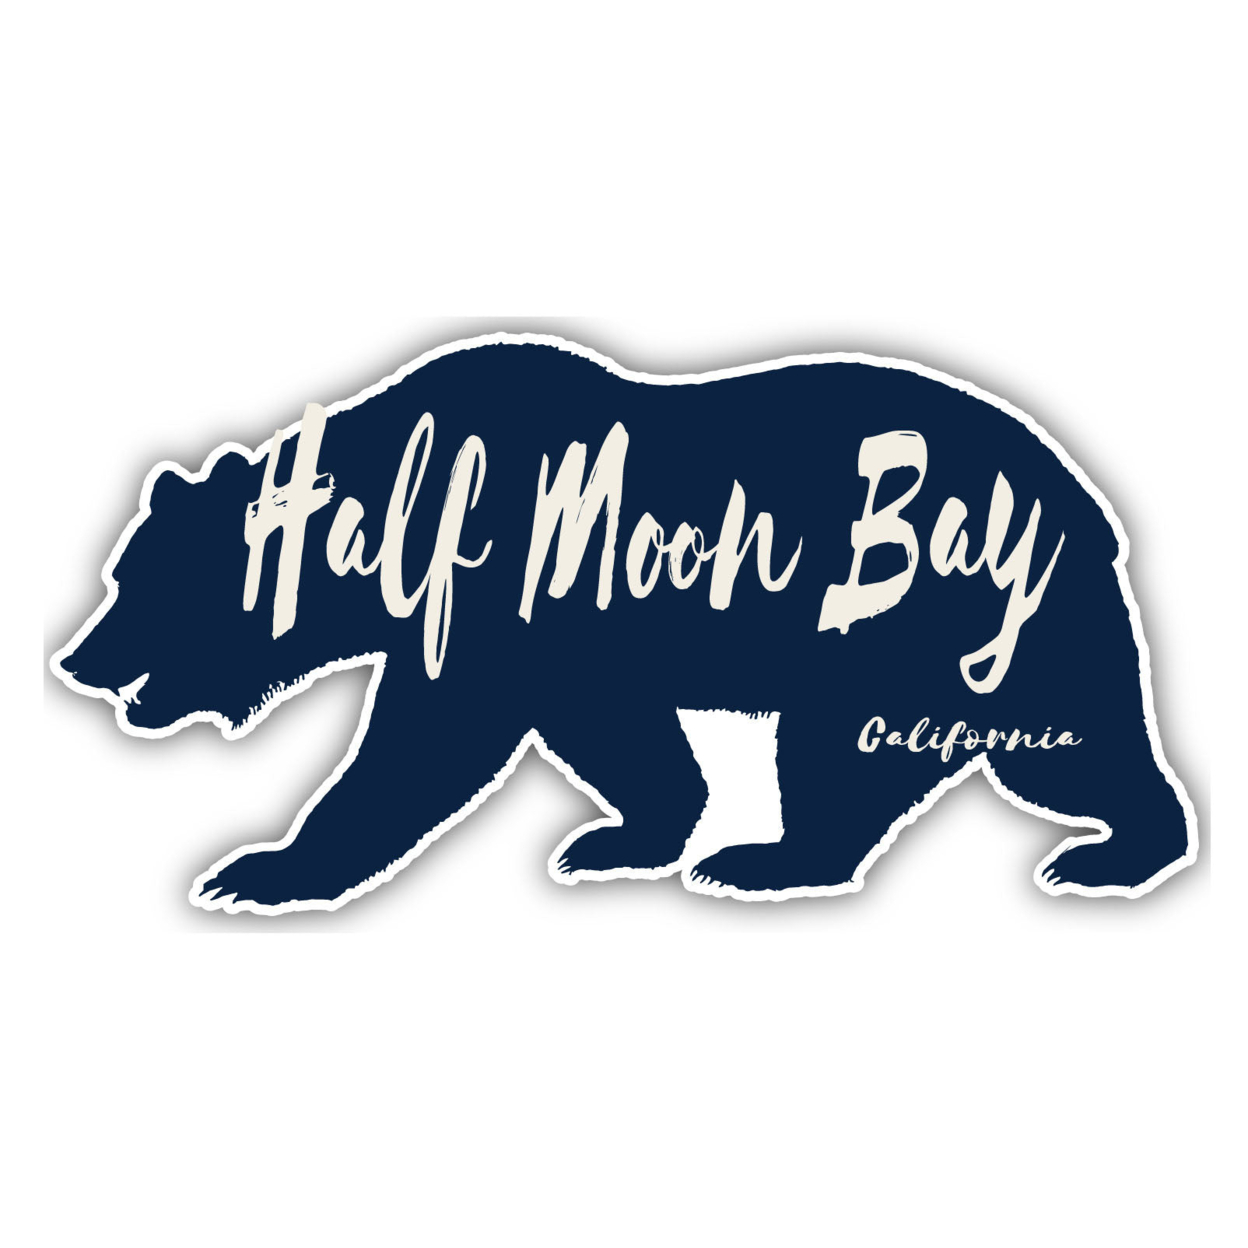 Half Moon Bay California Souvenir Decorative Stickers (Choose Theme And Size) - 4-Pack, 4-Inch, Tent